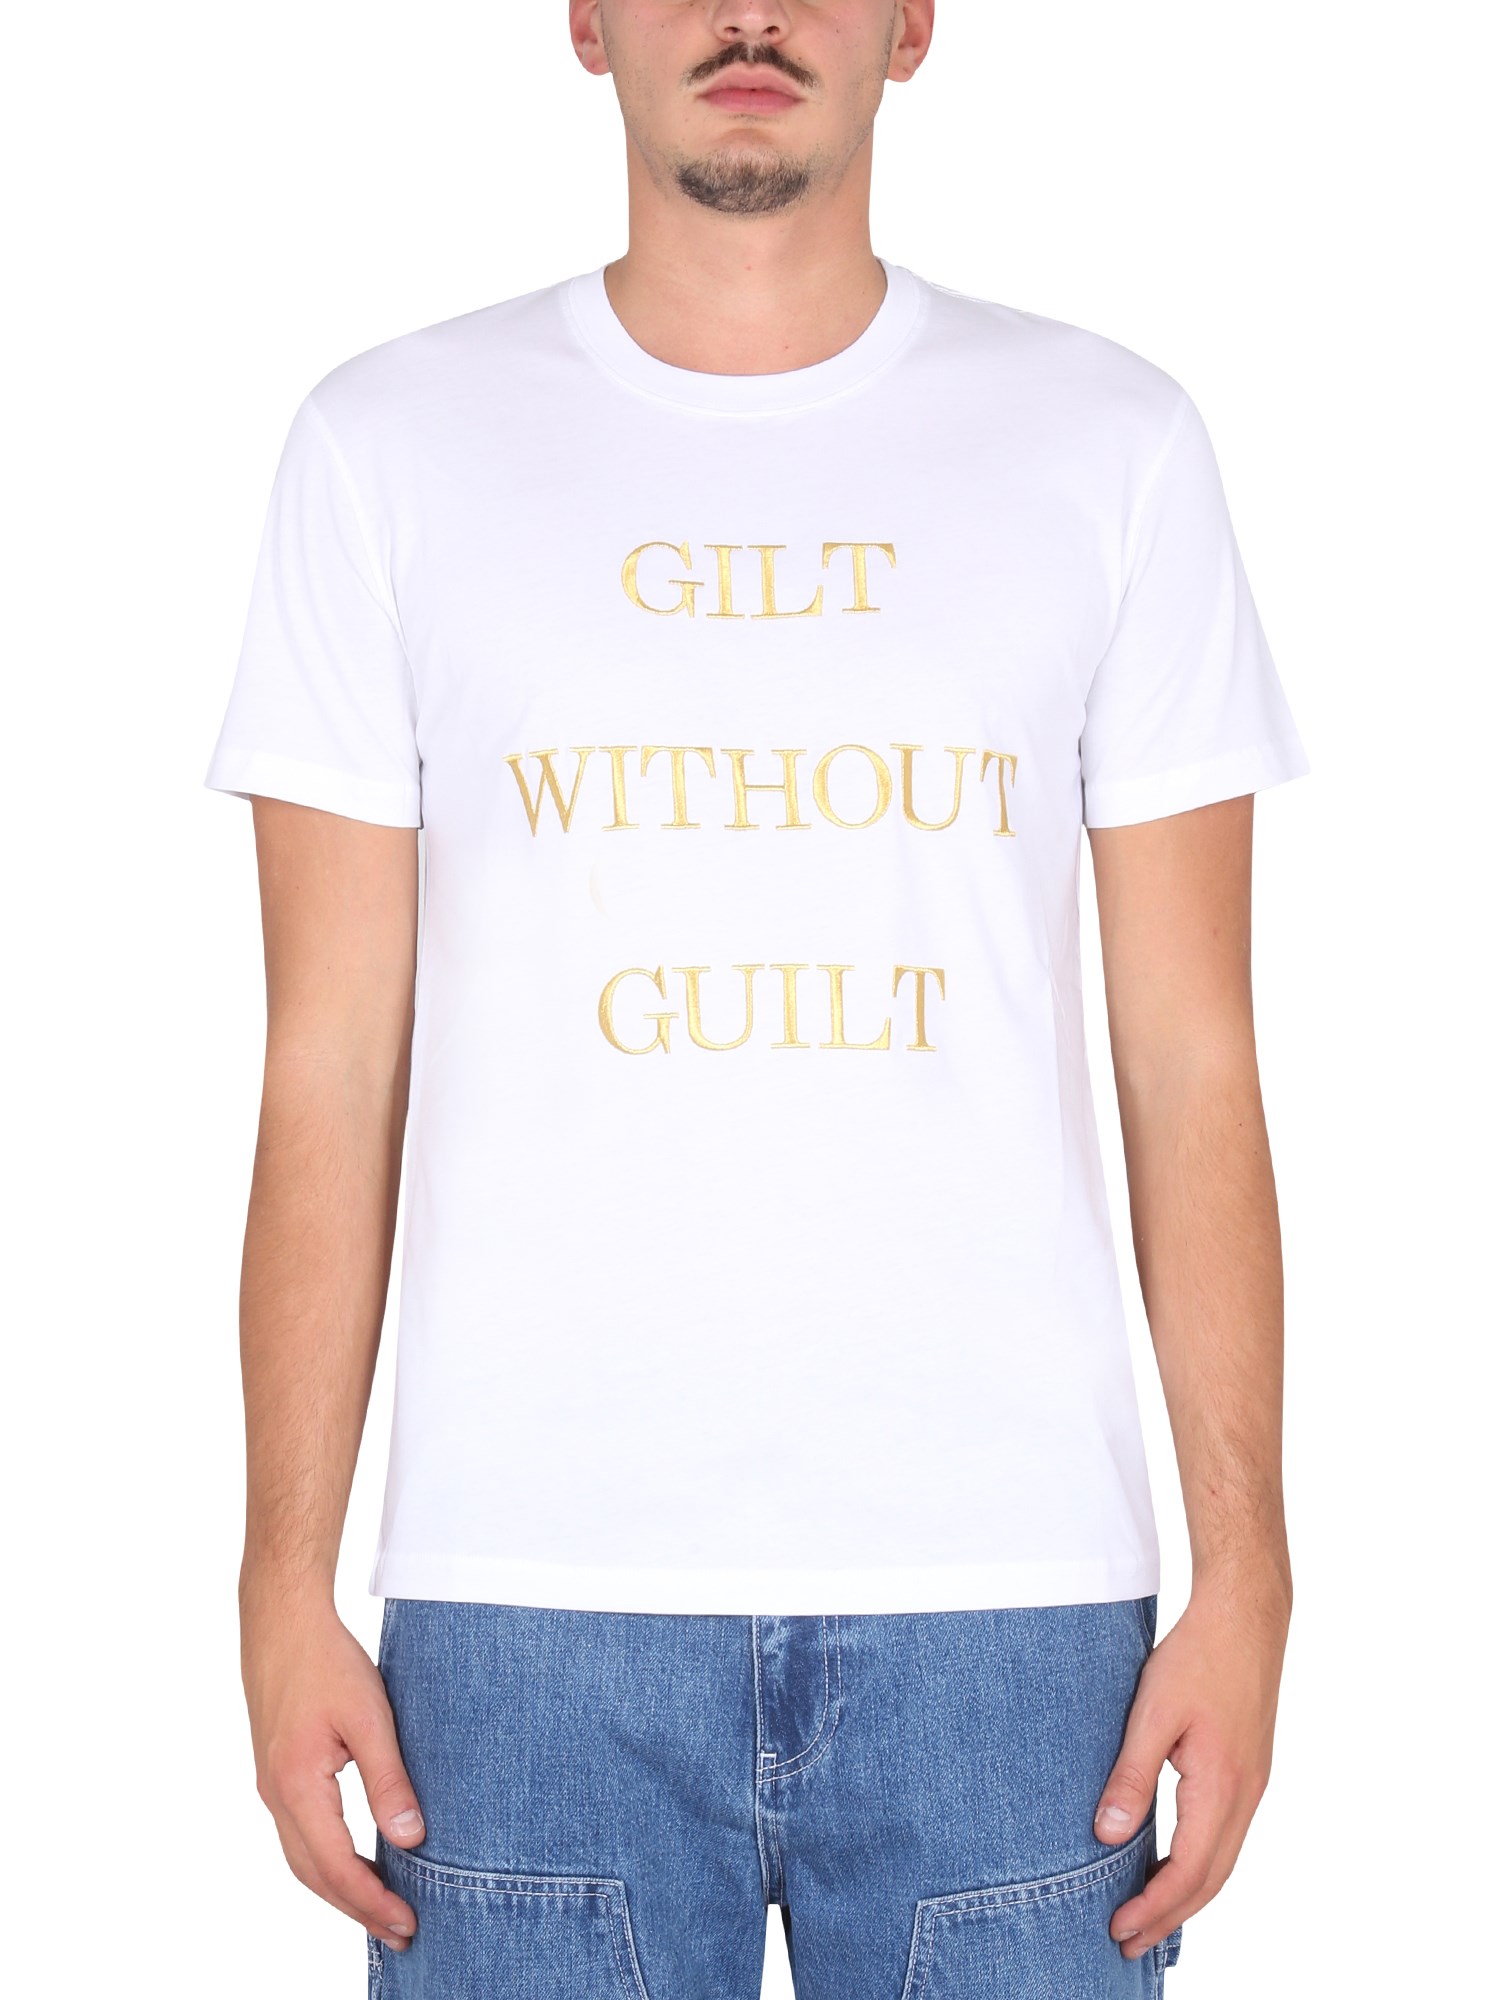 moschino "guilt without guilt" t-shirt